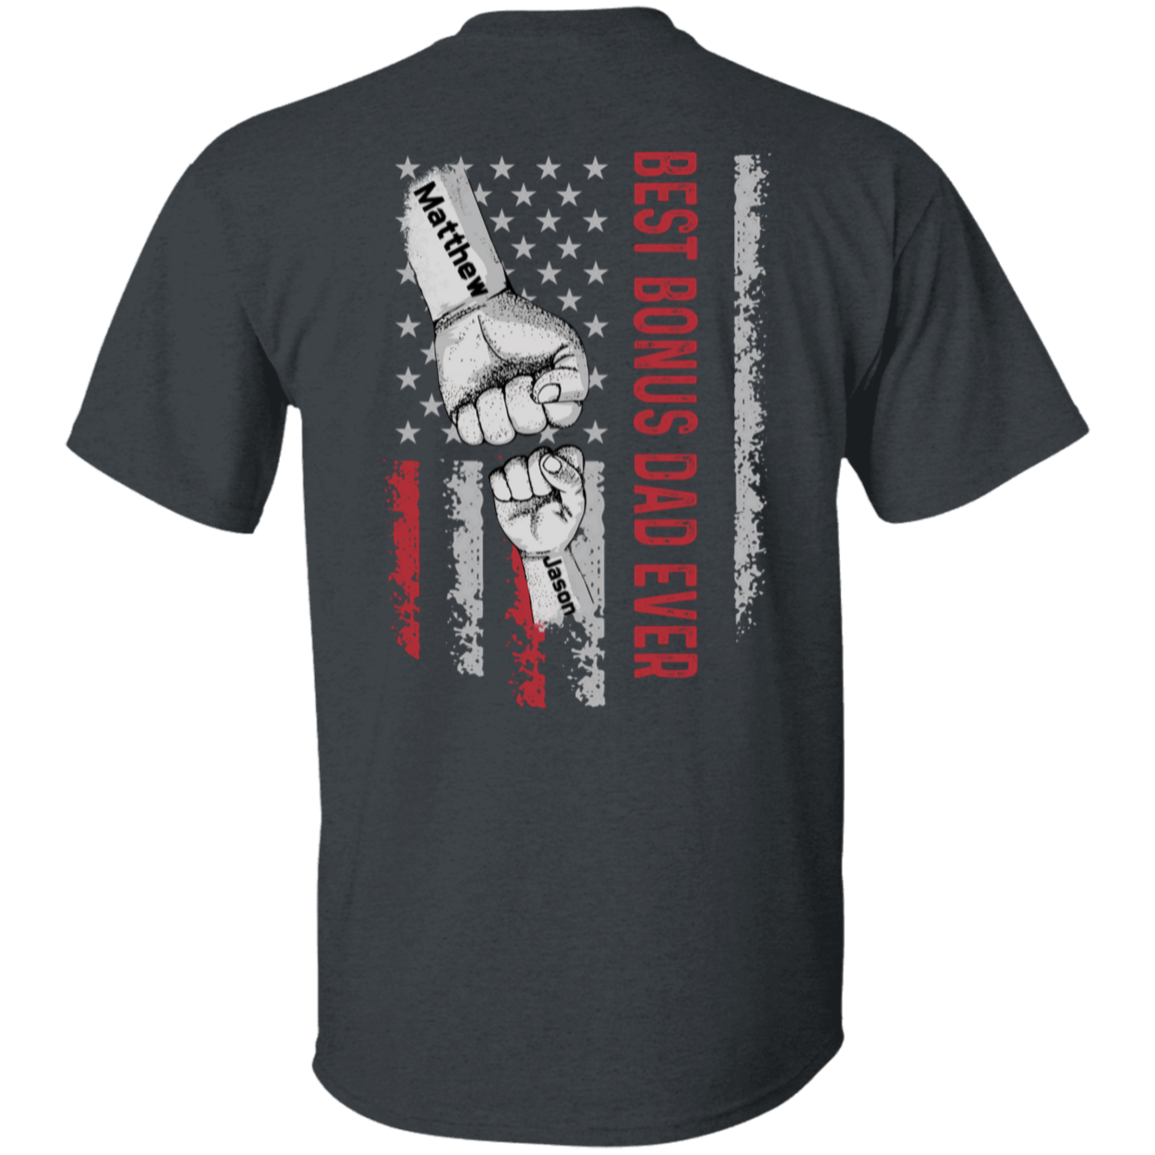 Personalized Dad Raised Fist Bump T-Shirt